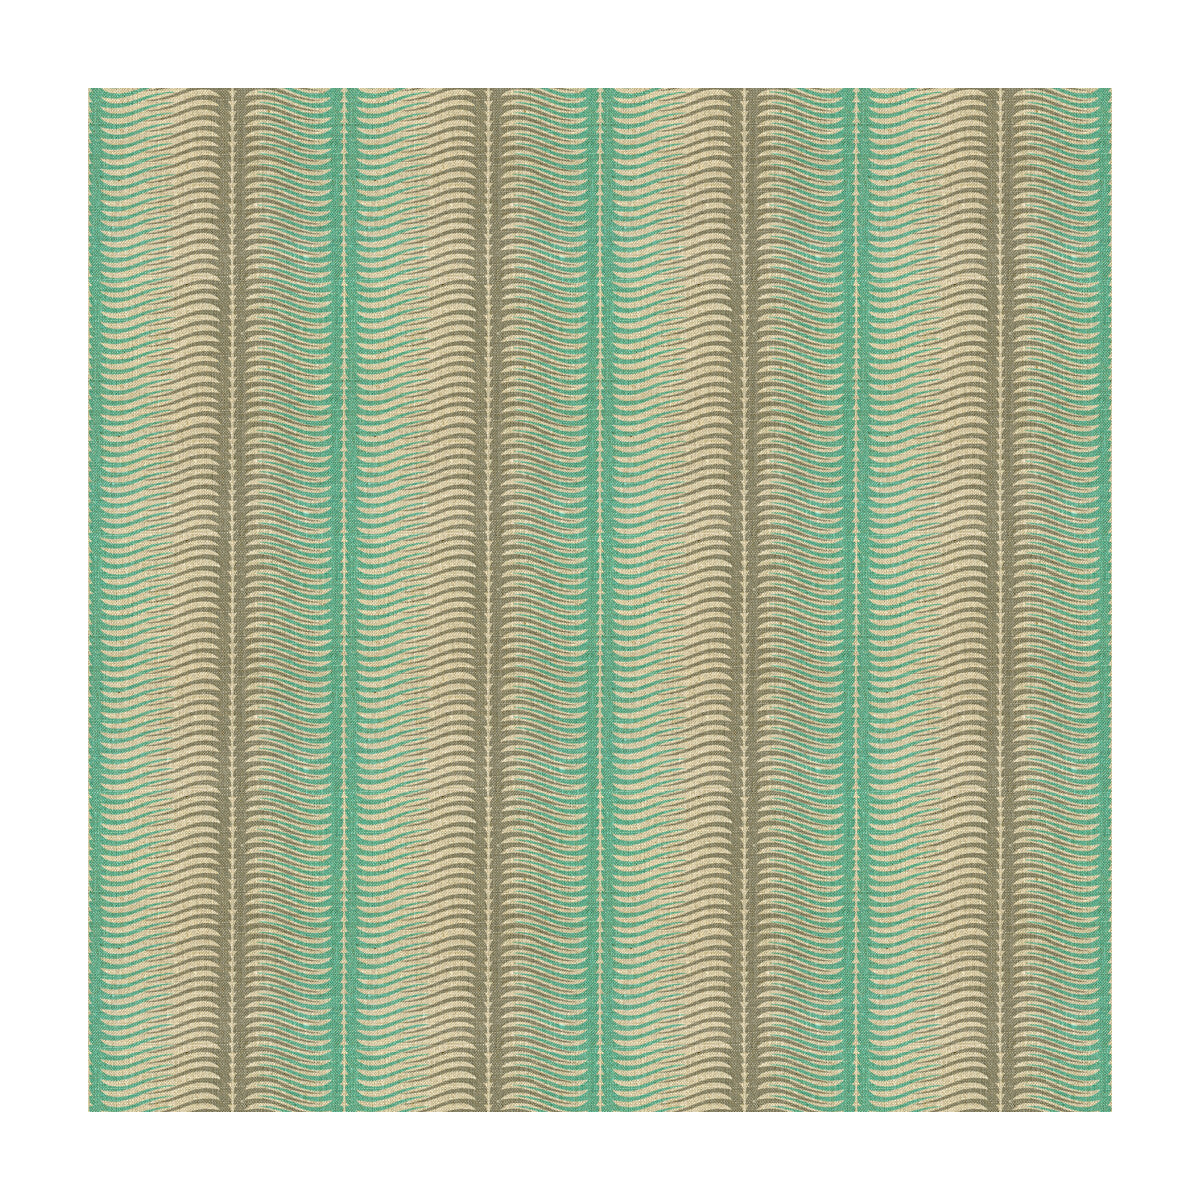 Stripes fabric in aqua color - pattern GWF-3509.13.0 - by Lee Jofa Modern in the Allegra Hicks Garden collection